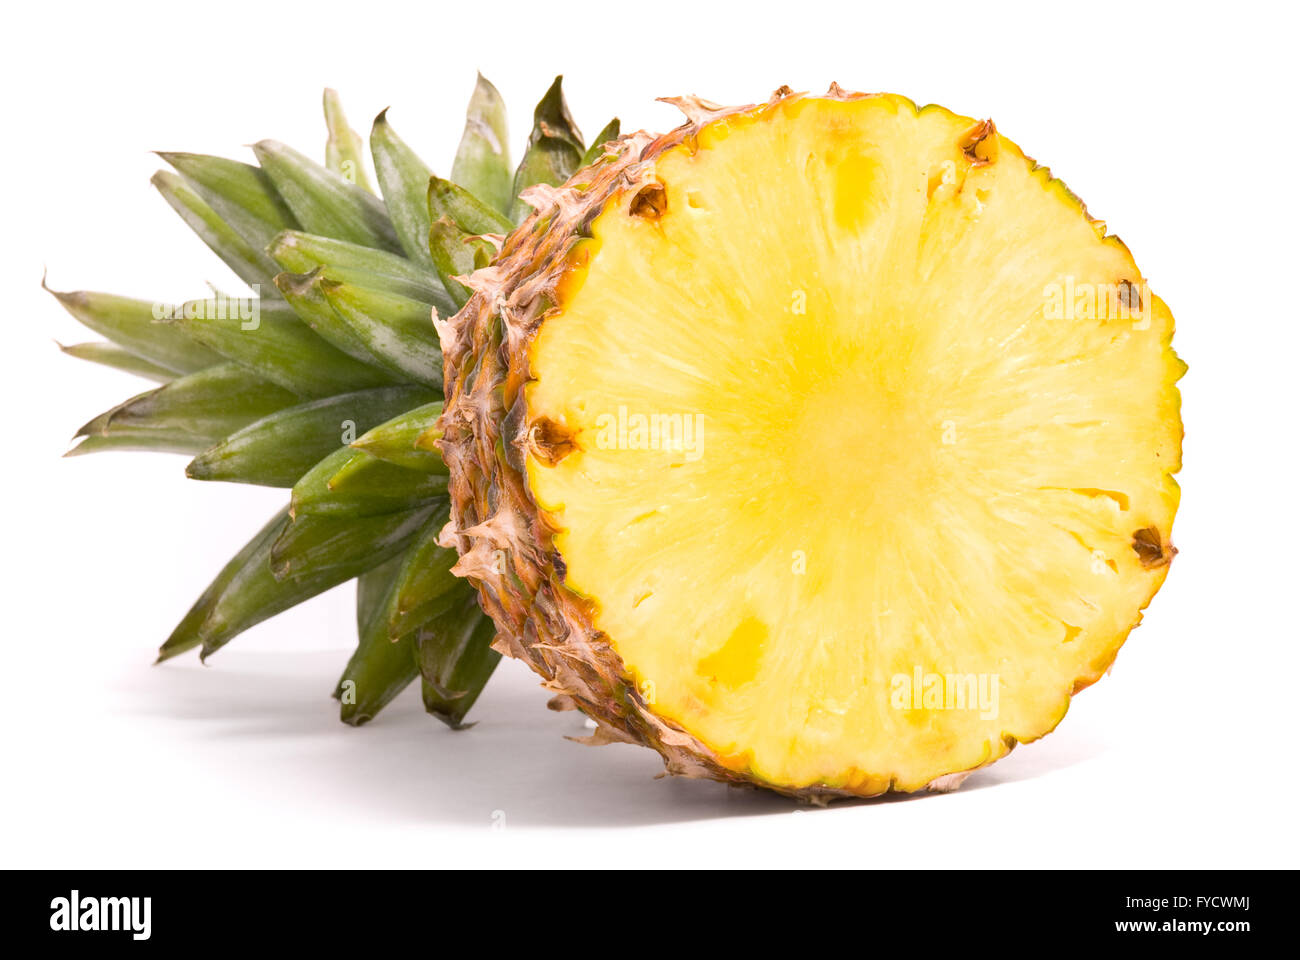 Sliced Pineapple on a white background Stock Photo